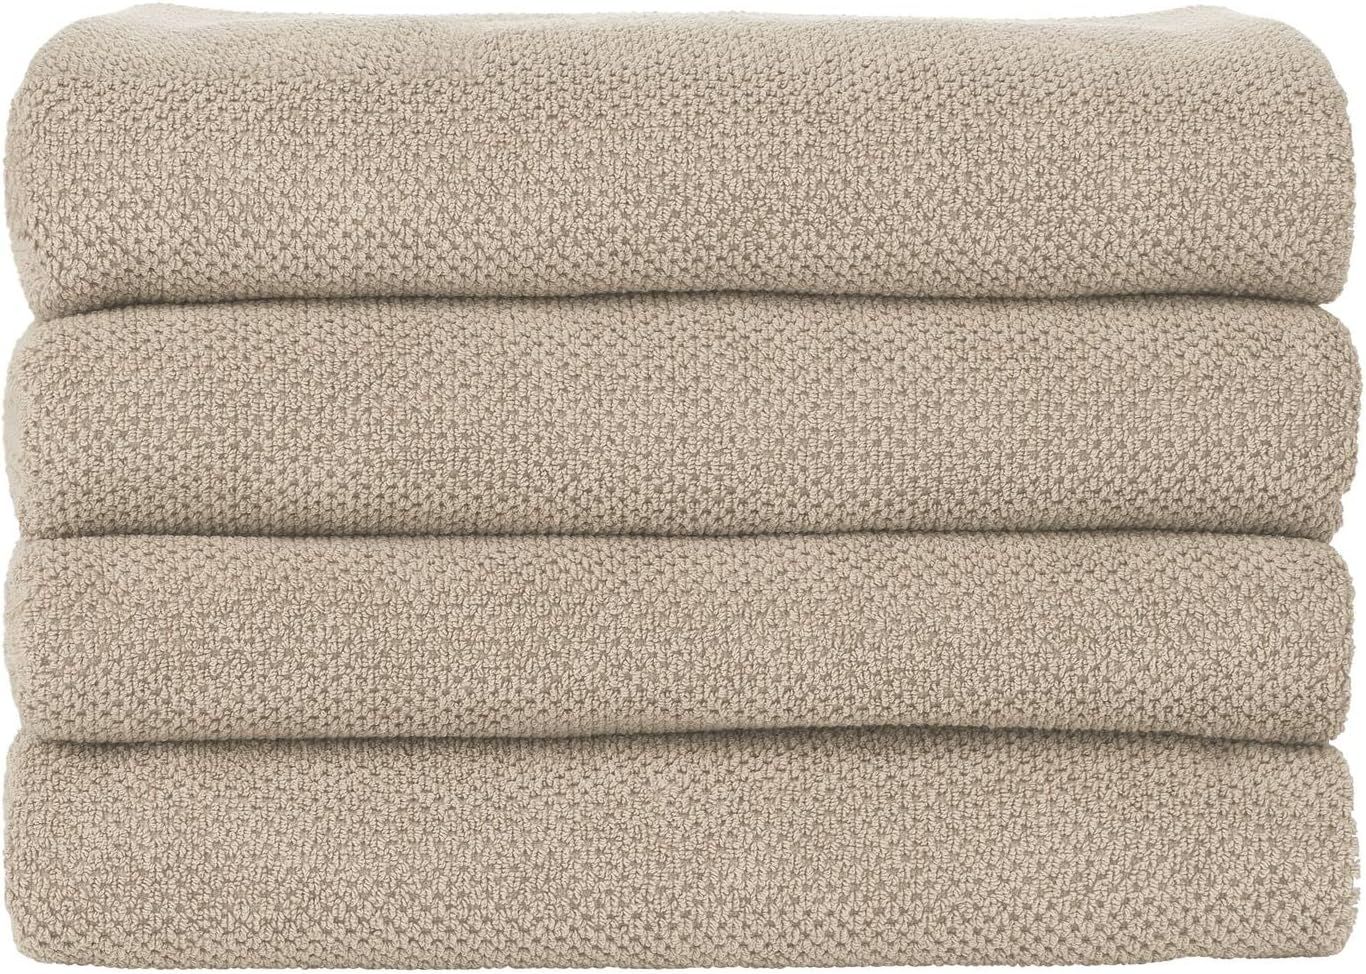 Nate Home by Nate Berkus 100% Cotton Textured Rice Weave Bath Towel Set of 4 - Soft and Absorbent... | Amazon (US)